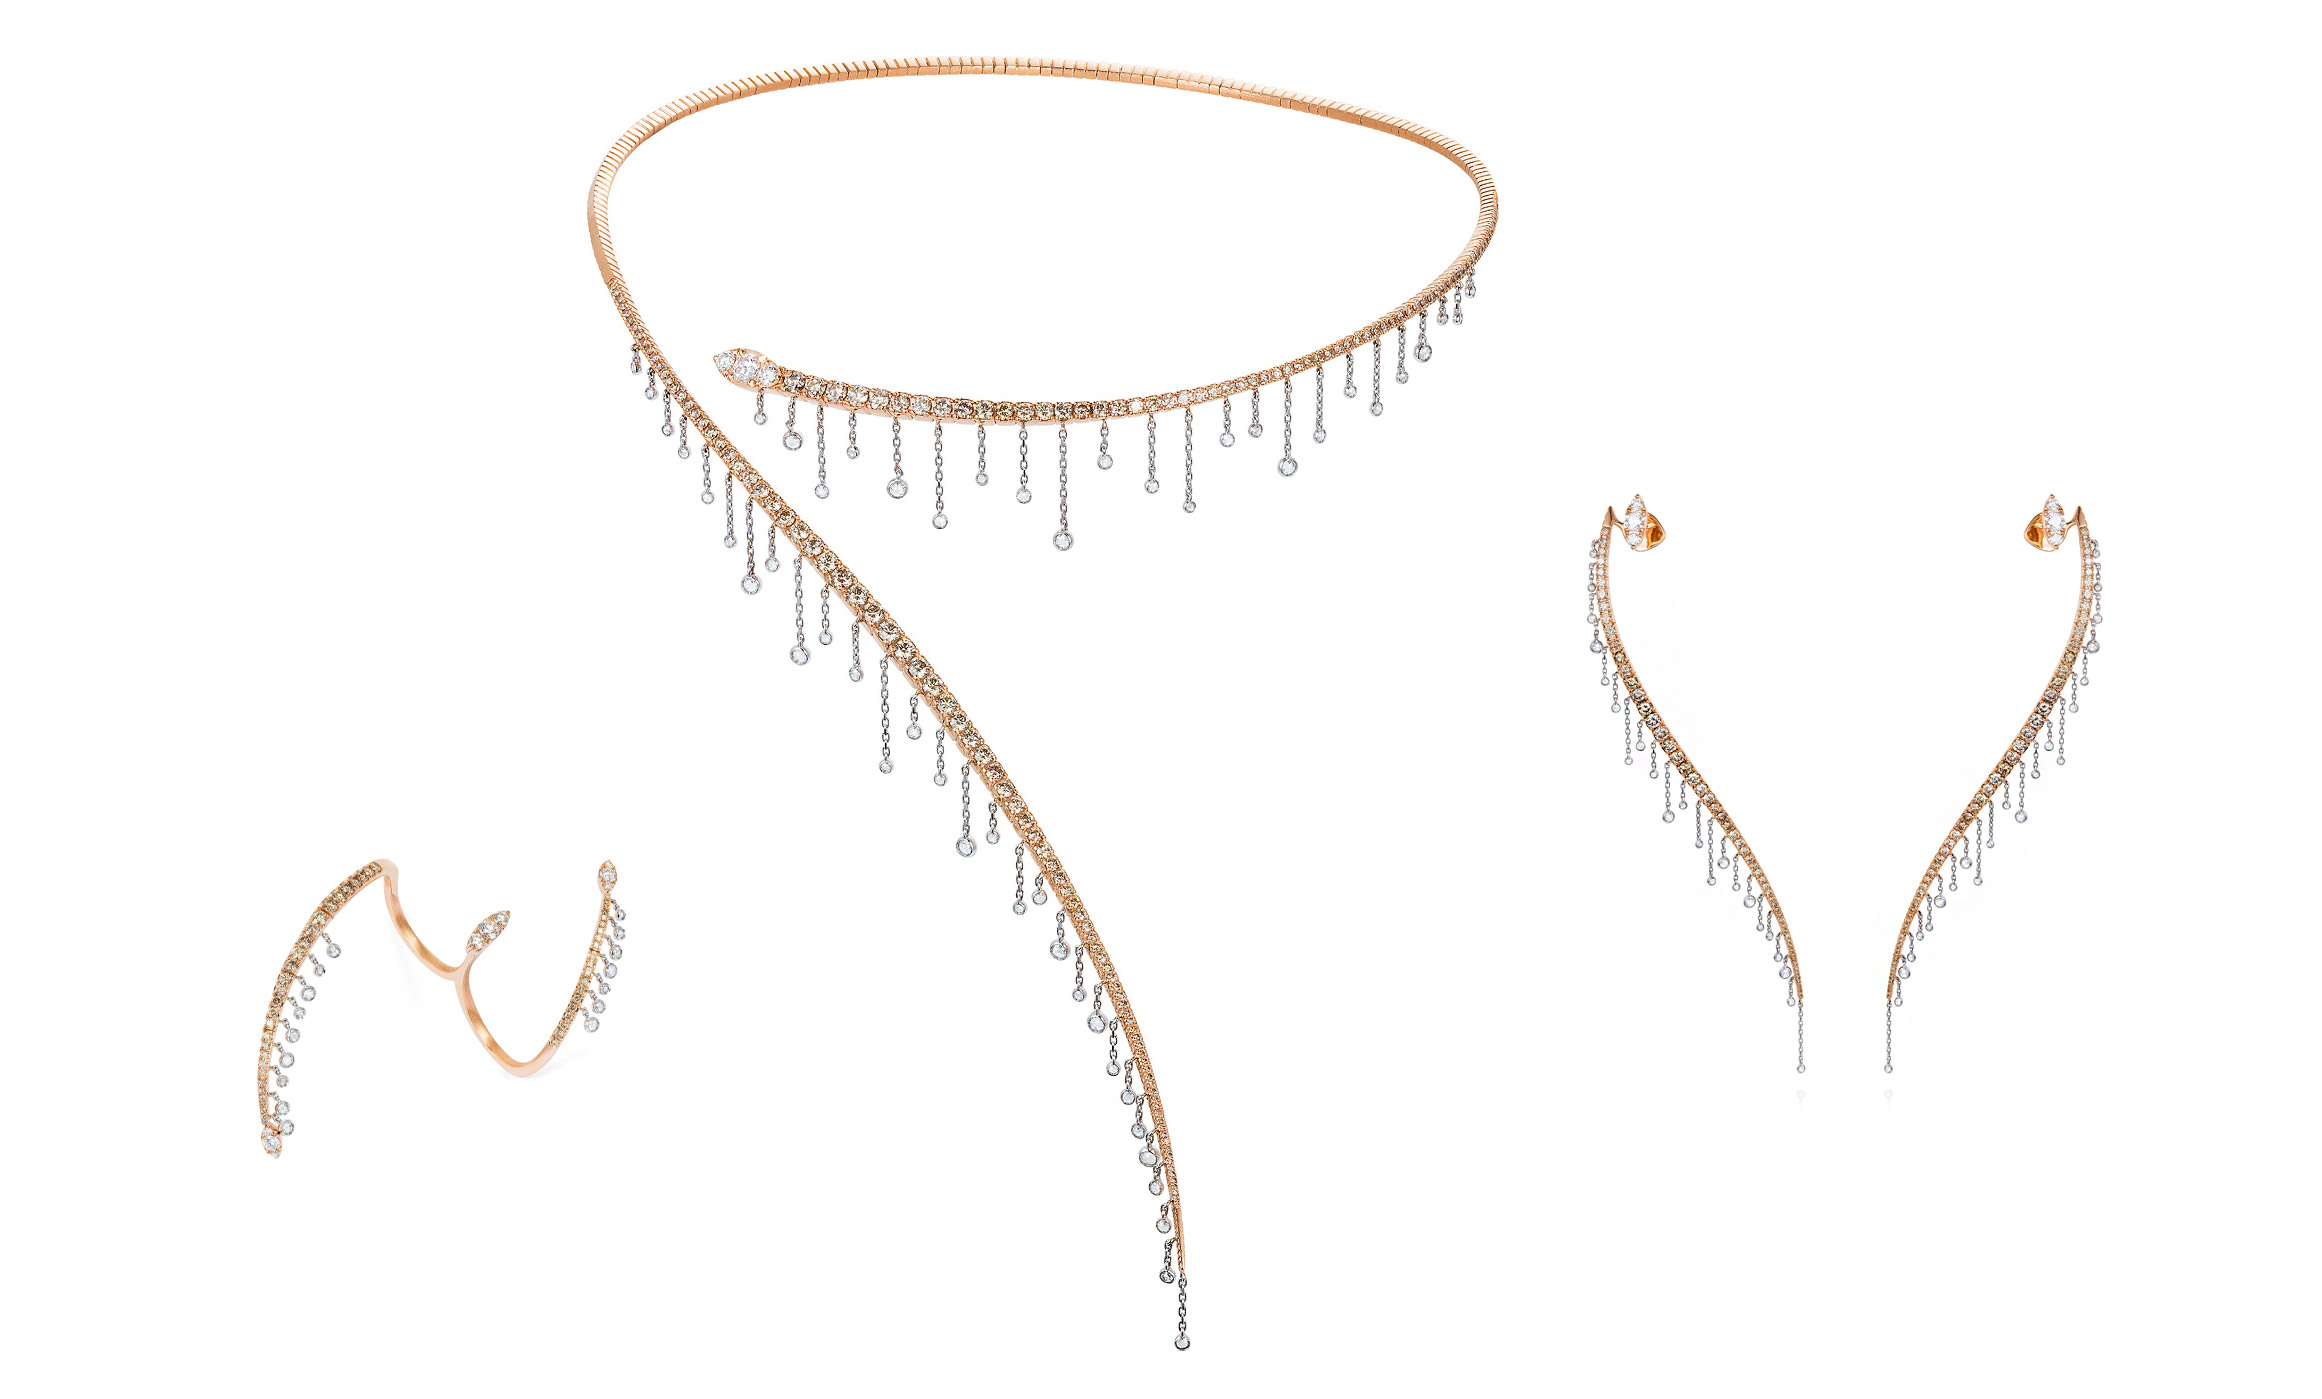 Rose gold and diamonds earrings, flexible necklace and a ring from Mike Joseph Waterfall collection